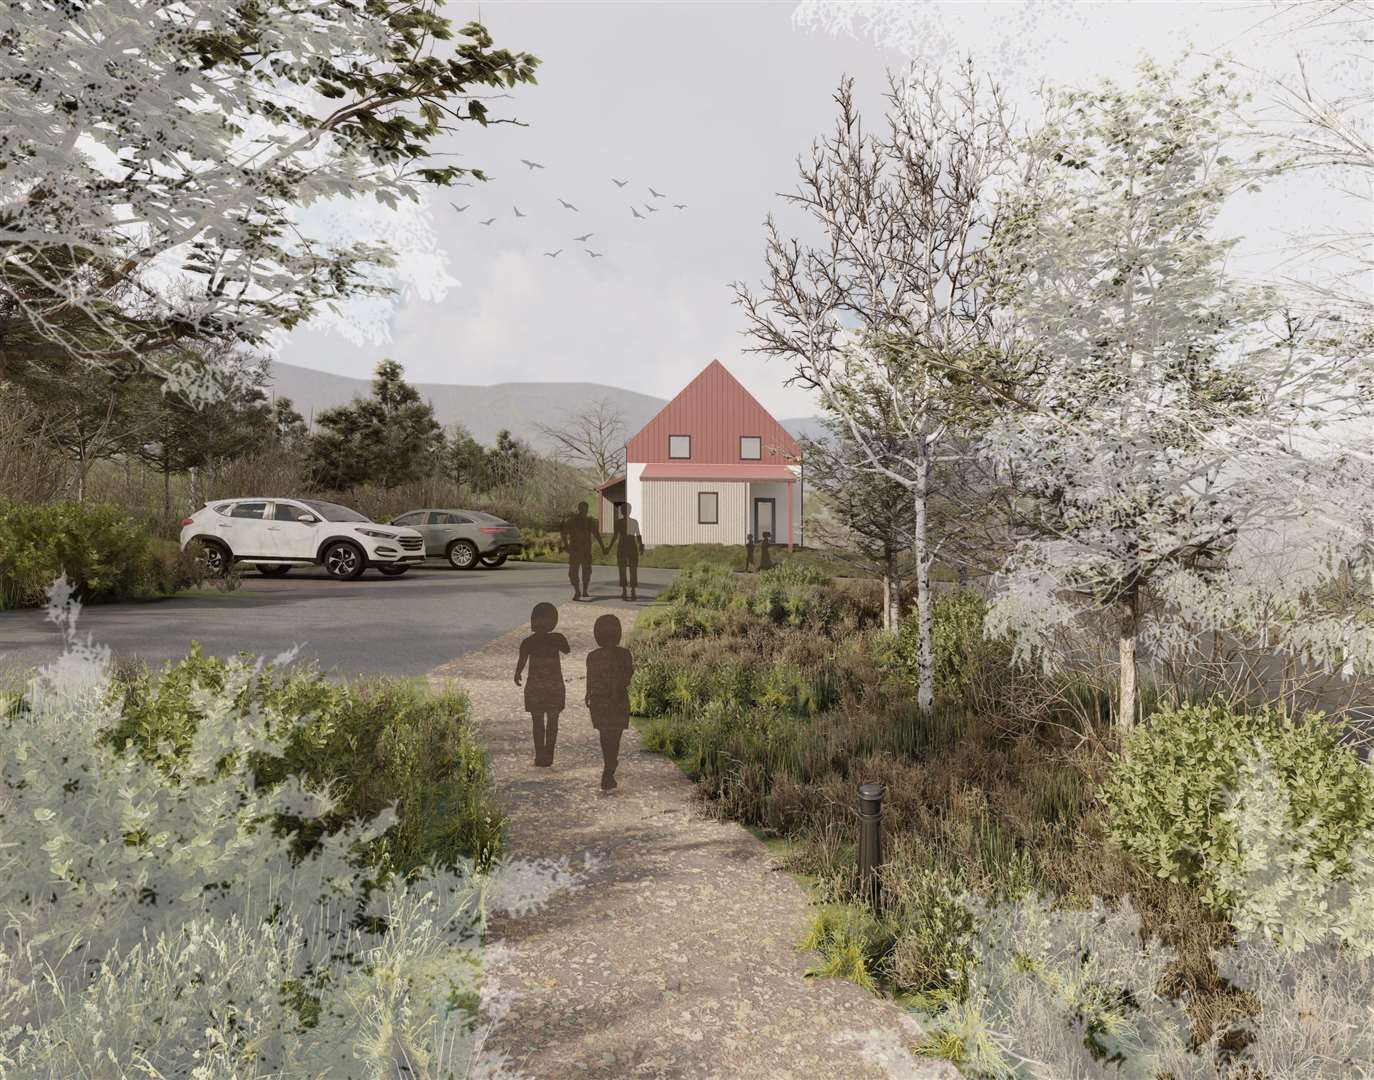 Site B will be used for the remaining two homes being build in the first phase of the development. Photo: Oberlanders Architects